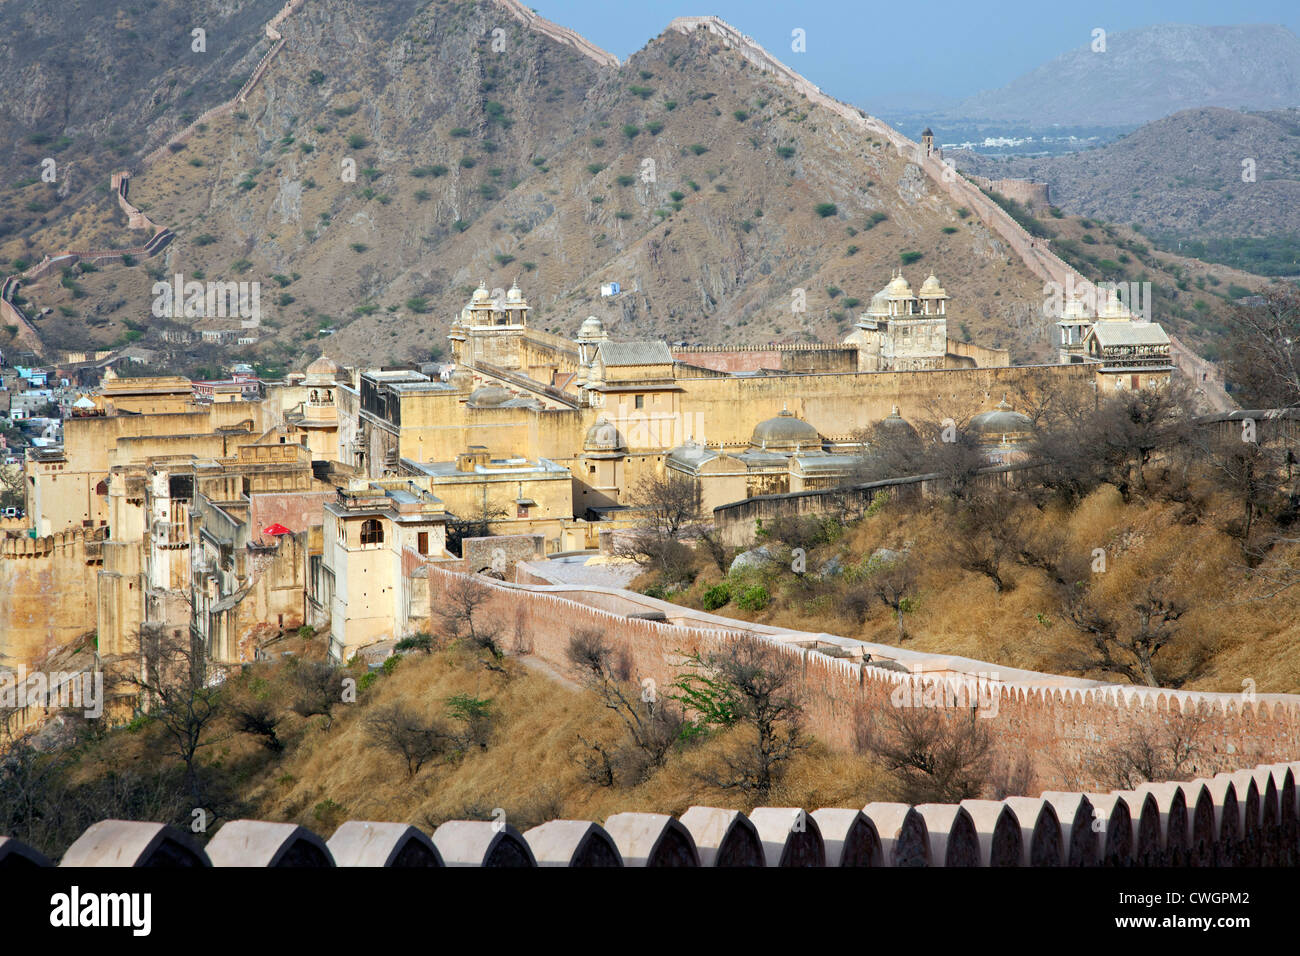 Forte Amer / Ambra Fort, palazzo in pietra arenaria rossa a Amer vicino a Jaipur, Rajasthan, India Foto Stock